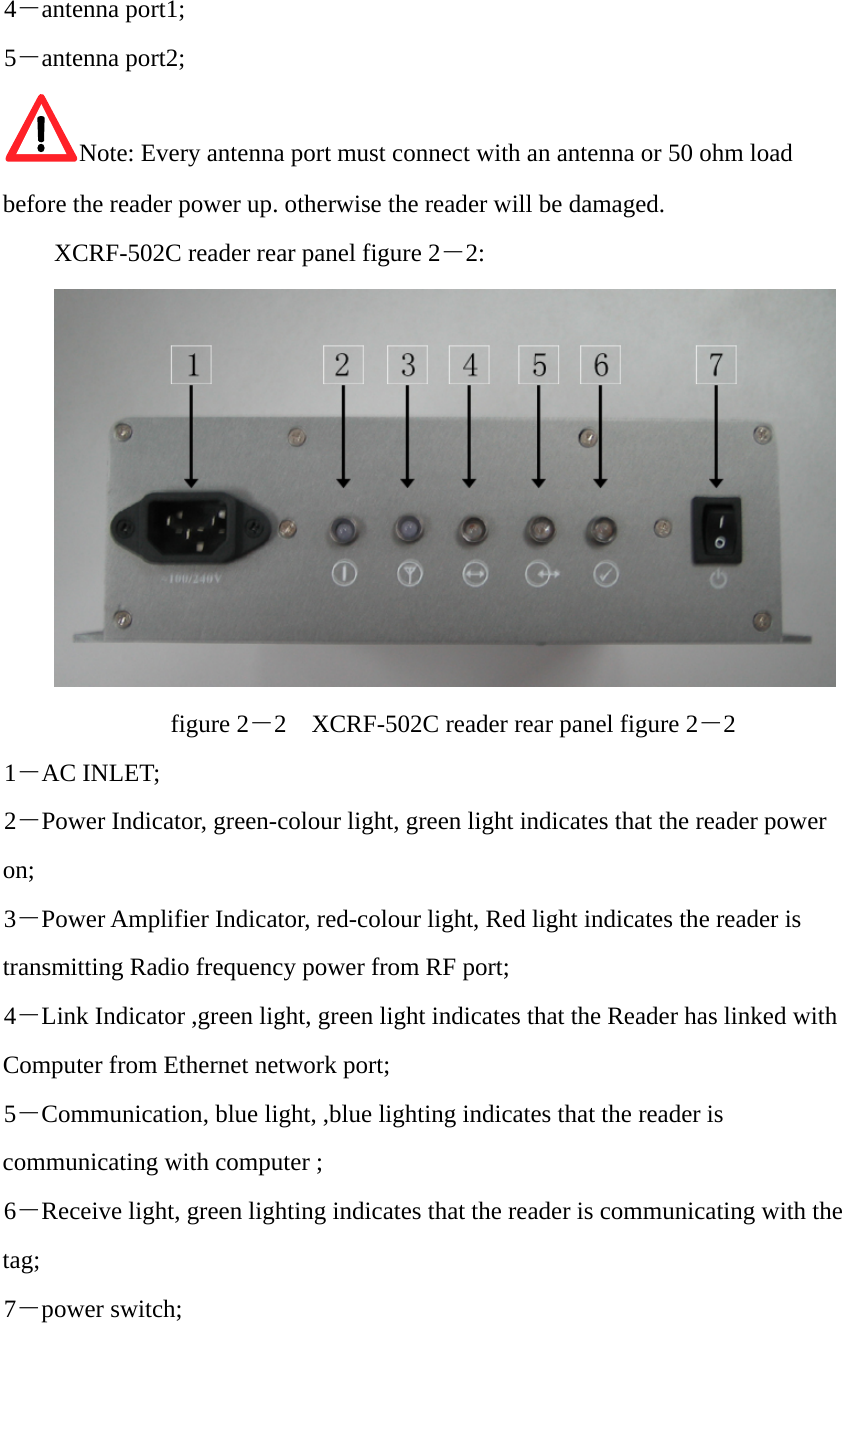                                                                                                                                                4－antenna port1; 5－antenna port2; Note: Every antenna port must connect with an antenna or 50 ohm load before the reader power up. otherwise the reader will be damaged. XCRF-502C reader rear panel figure 2－2:  figure 2－2    XCRF-502C reader rear panel figure 2－2 1－AC INLET; 2－Power Indicator, green-colour light, green light indicates that the reader power on; 3－Power Amplifier Indicator, red-colour light, Red light indicates the reader is transmitting Radio frequency power from RF port; 4－Link Indicator ,green light, green light indicates that the Reader has linked with Computer from Ethernet network port; 5－Communication, blue light, ,blue lighting indicates that the reader is communicating with computer ; 6－Receive light, green lighting indicates that the reader is communicating with the tag;  7－power switch;  